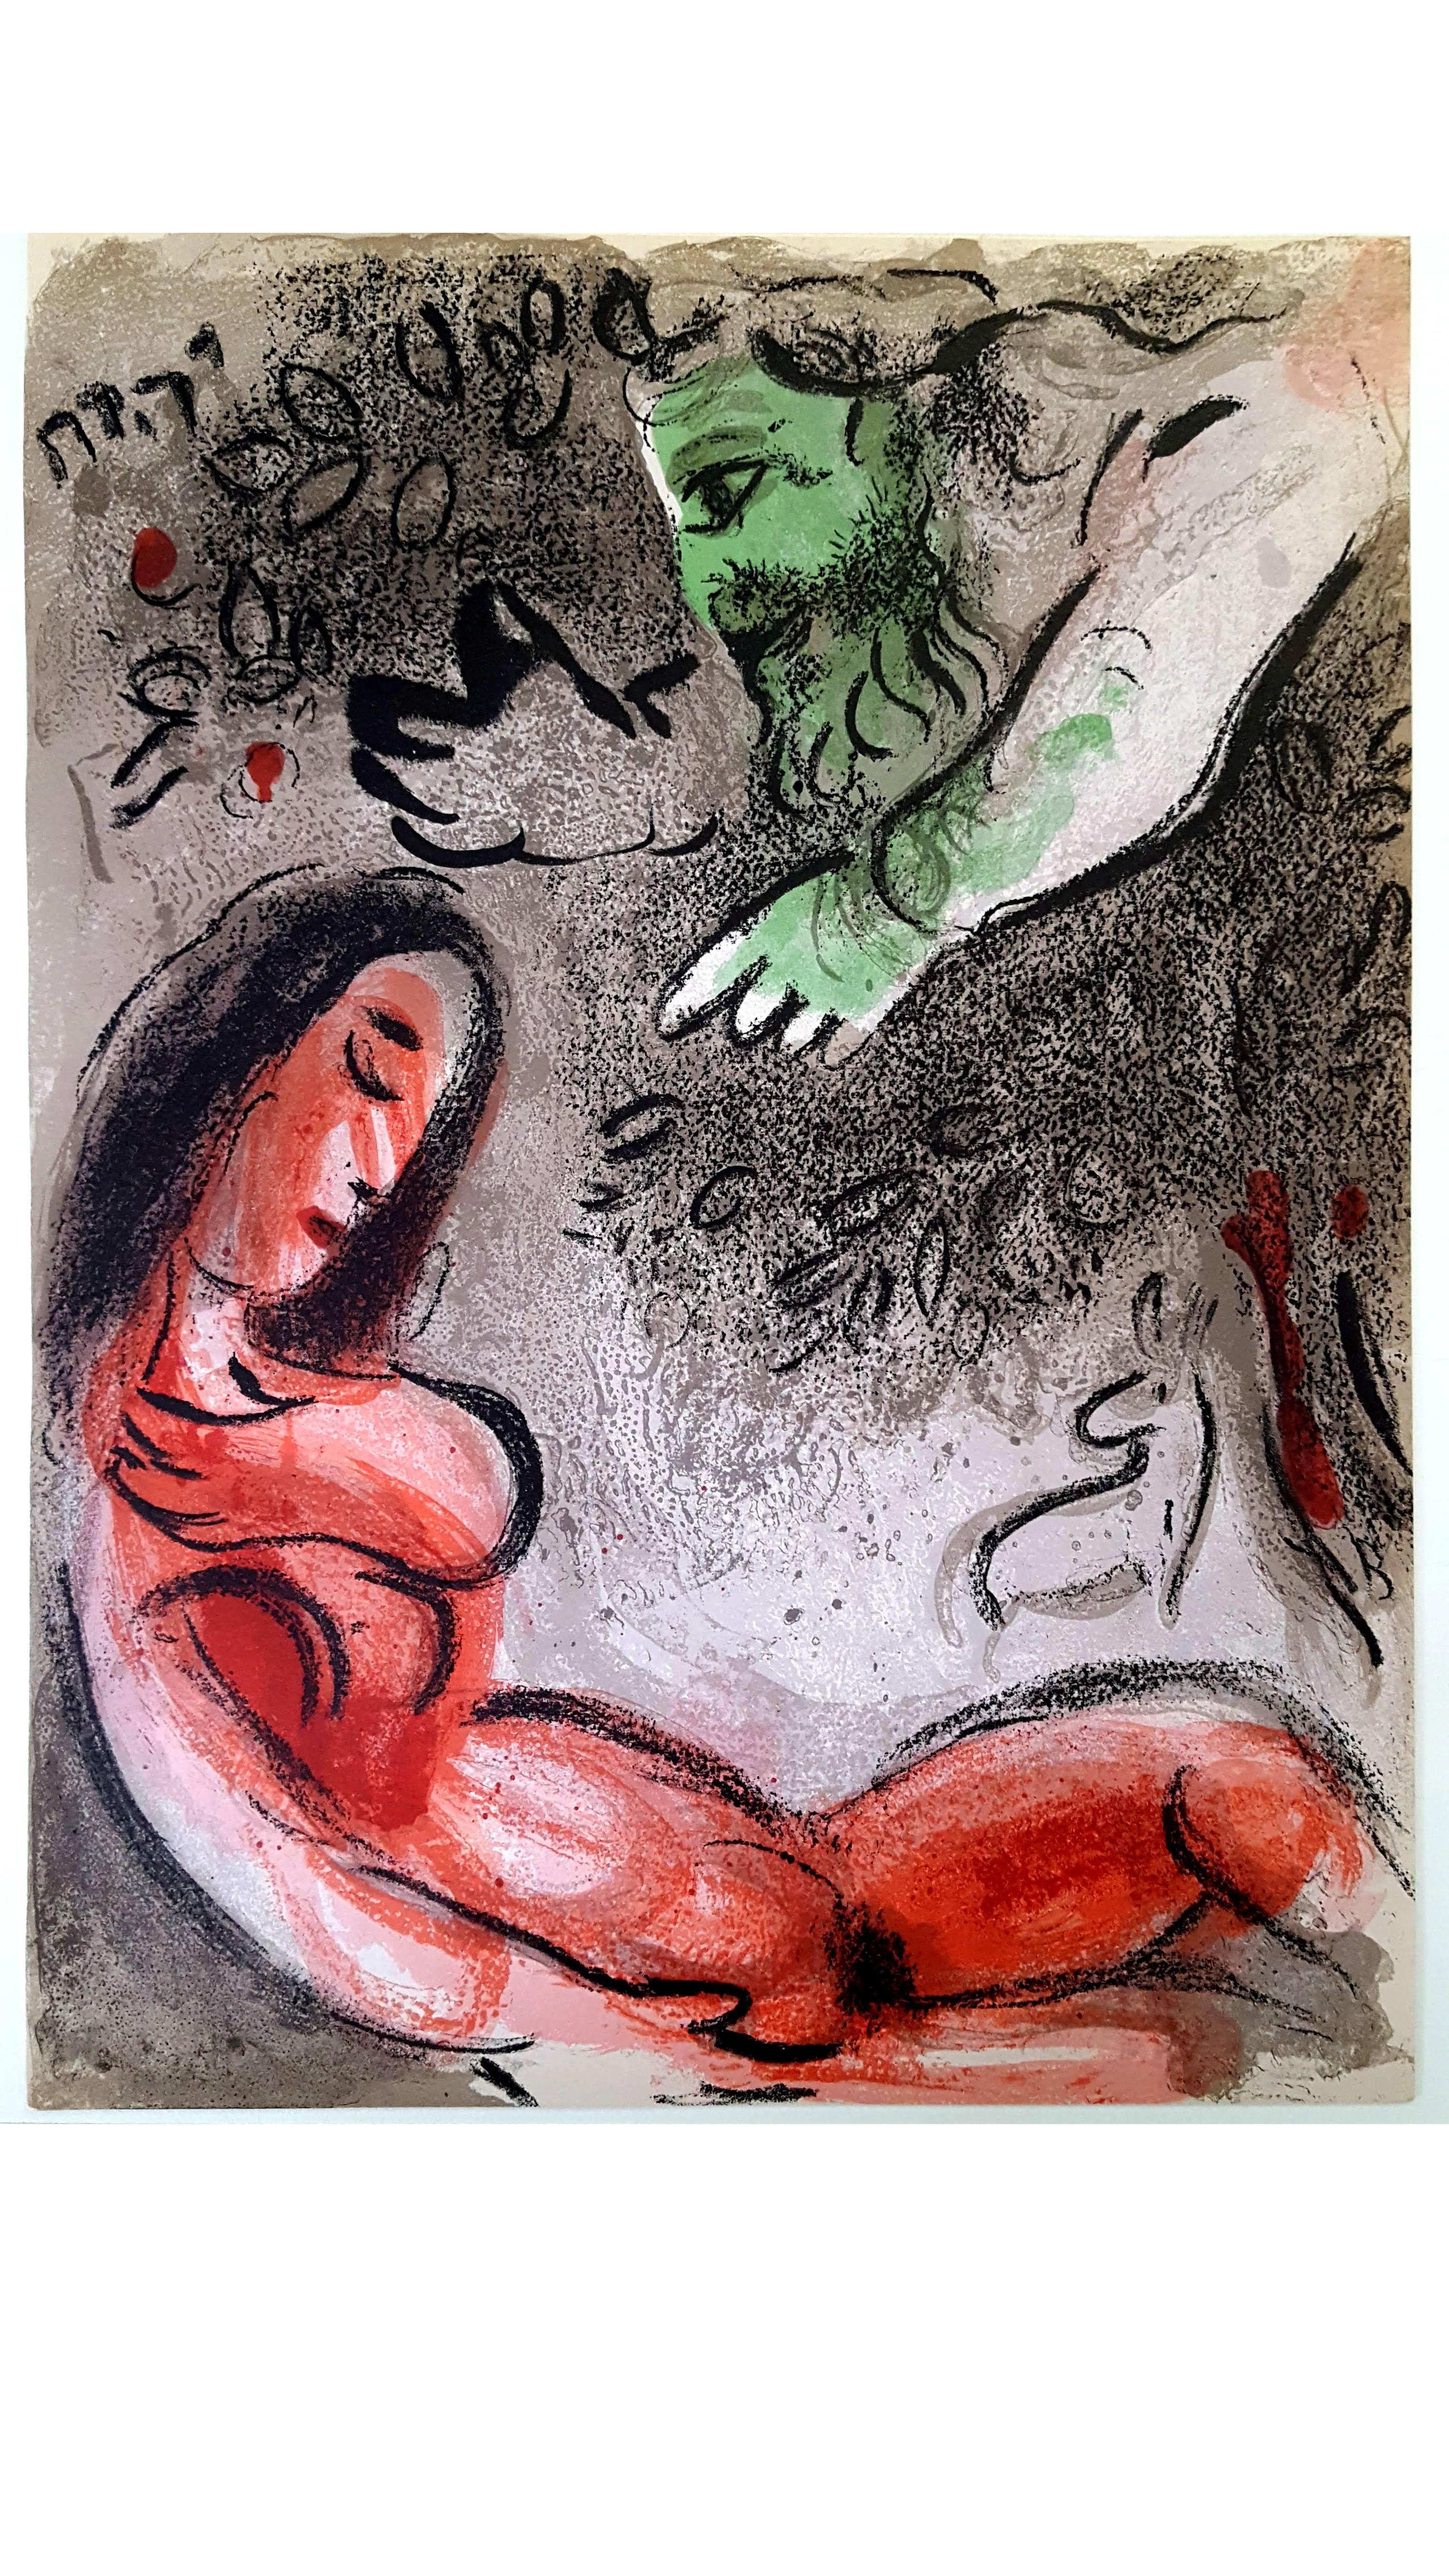 Marc Chagall - The Bible - Eve - Original Lithograph